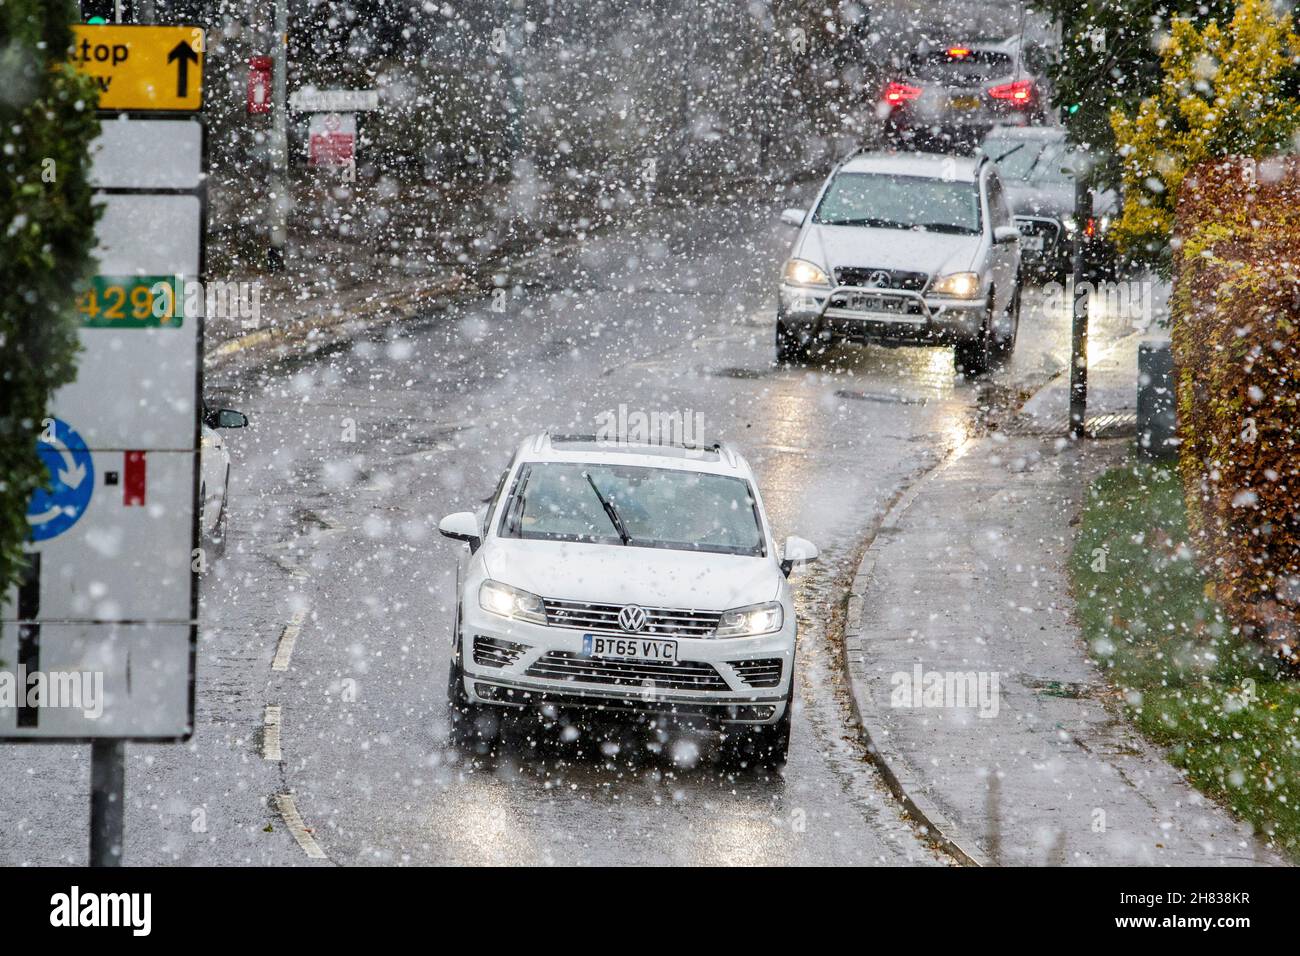 Chippenham, Wiltshire, UK. 27th November, 2021. Drivers are pictured in Chippenham as the first snow showers of the winter fall in the town. Credit: Lynchpics/Alamy Live News Stock Photo